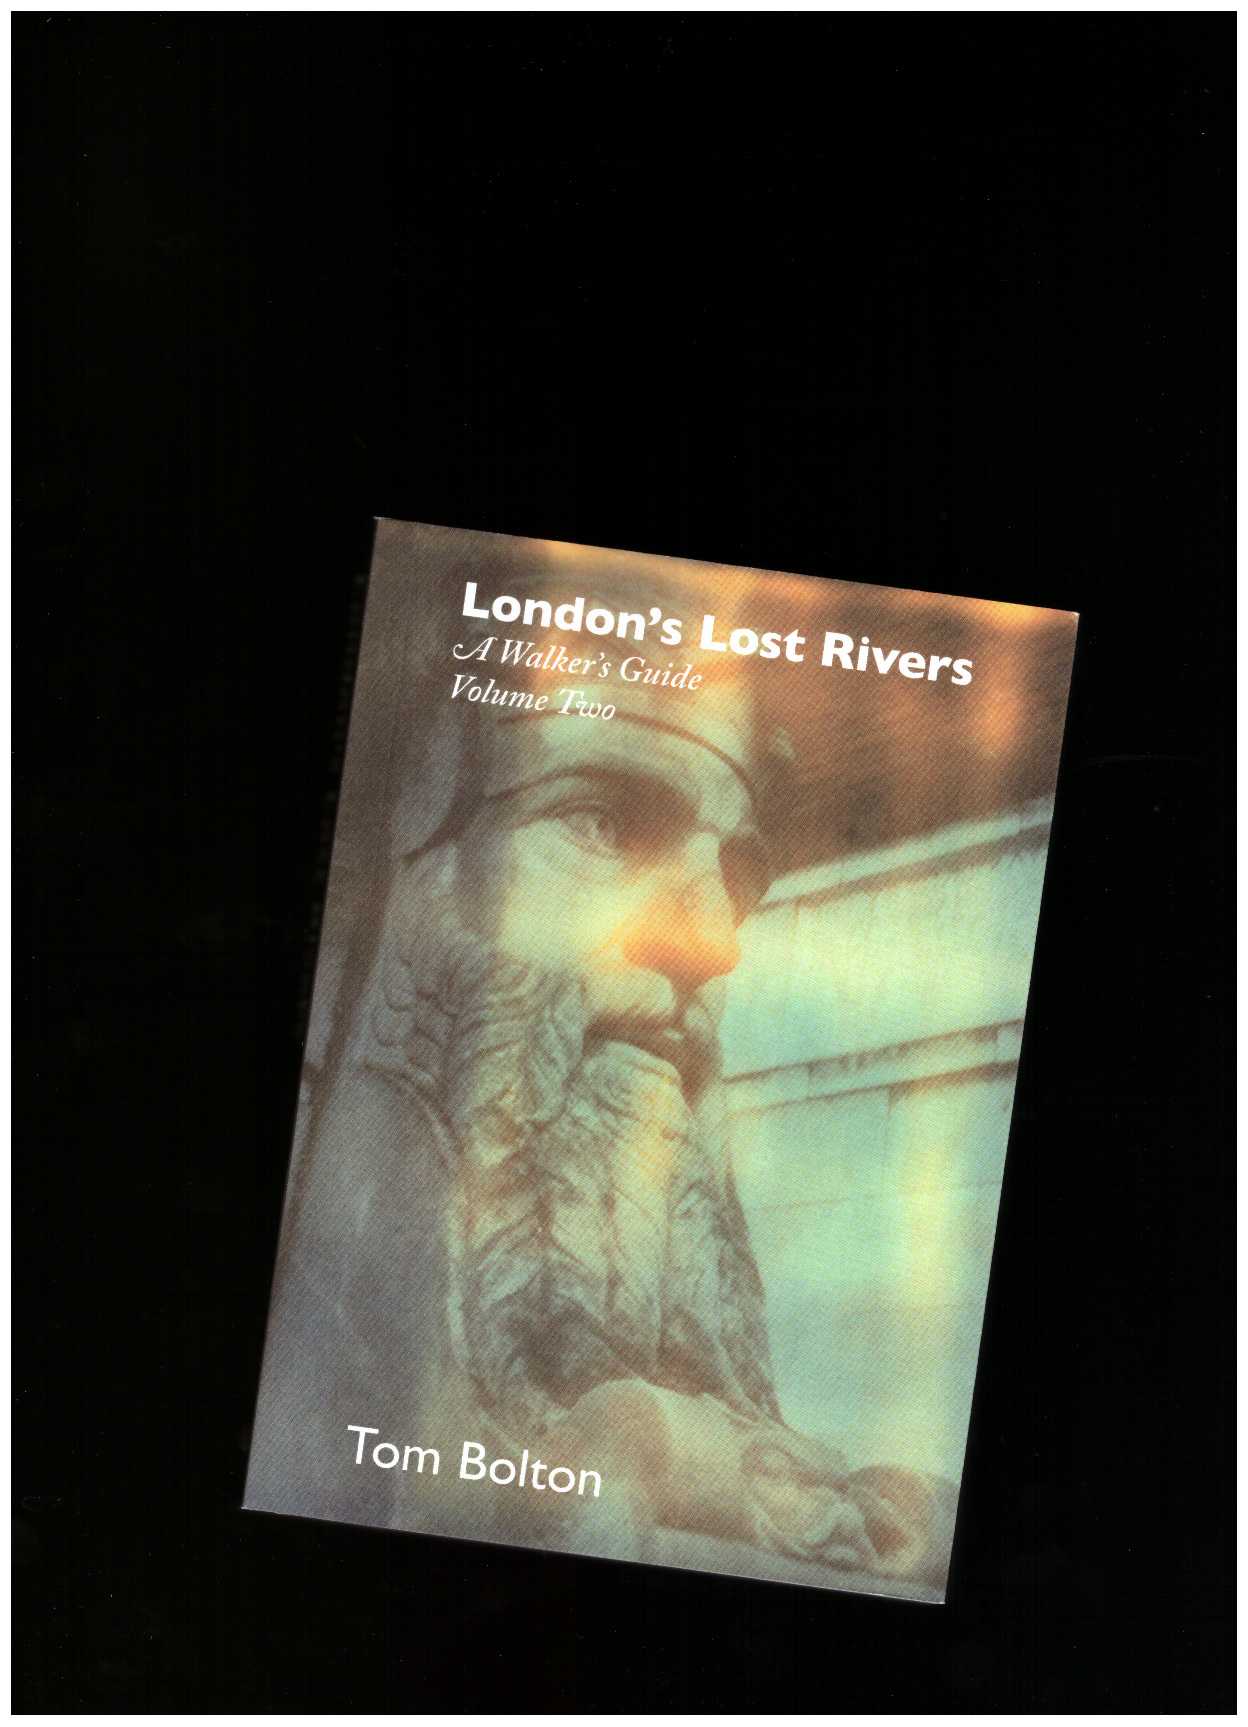 BOLTON, Tom - London's Lost Rivers, Volume 2: A Walker's Guide